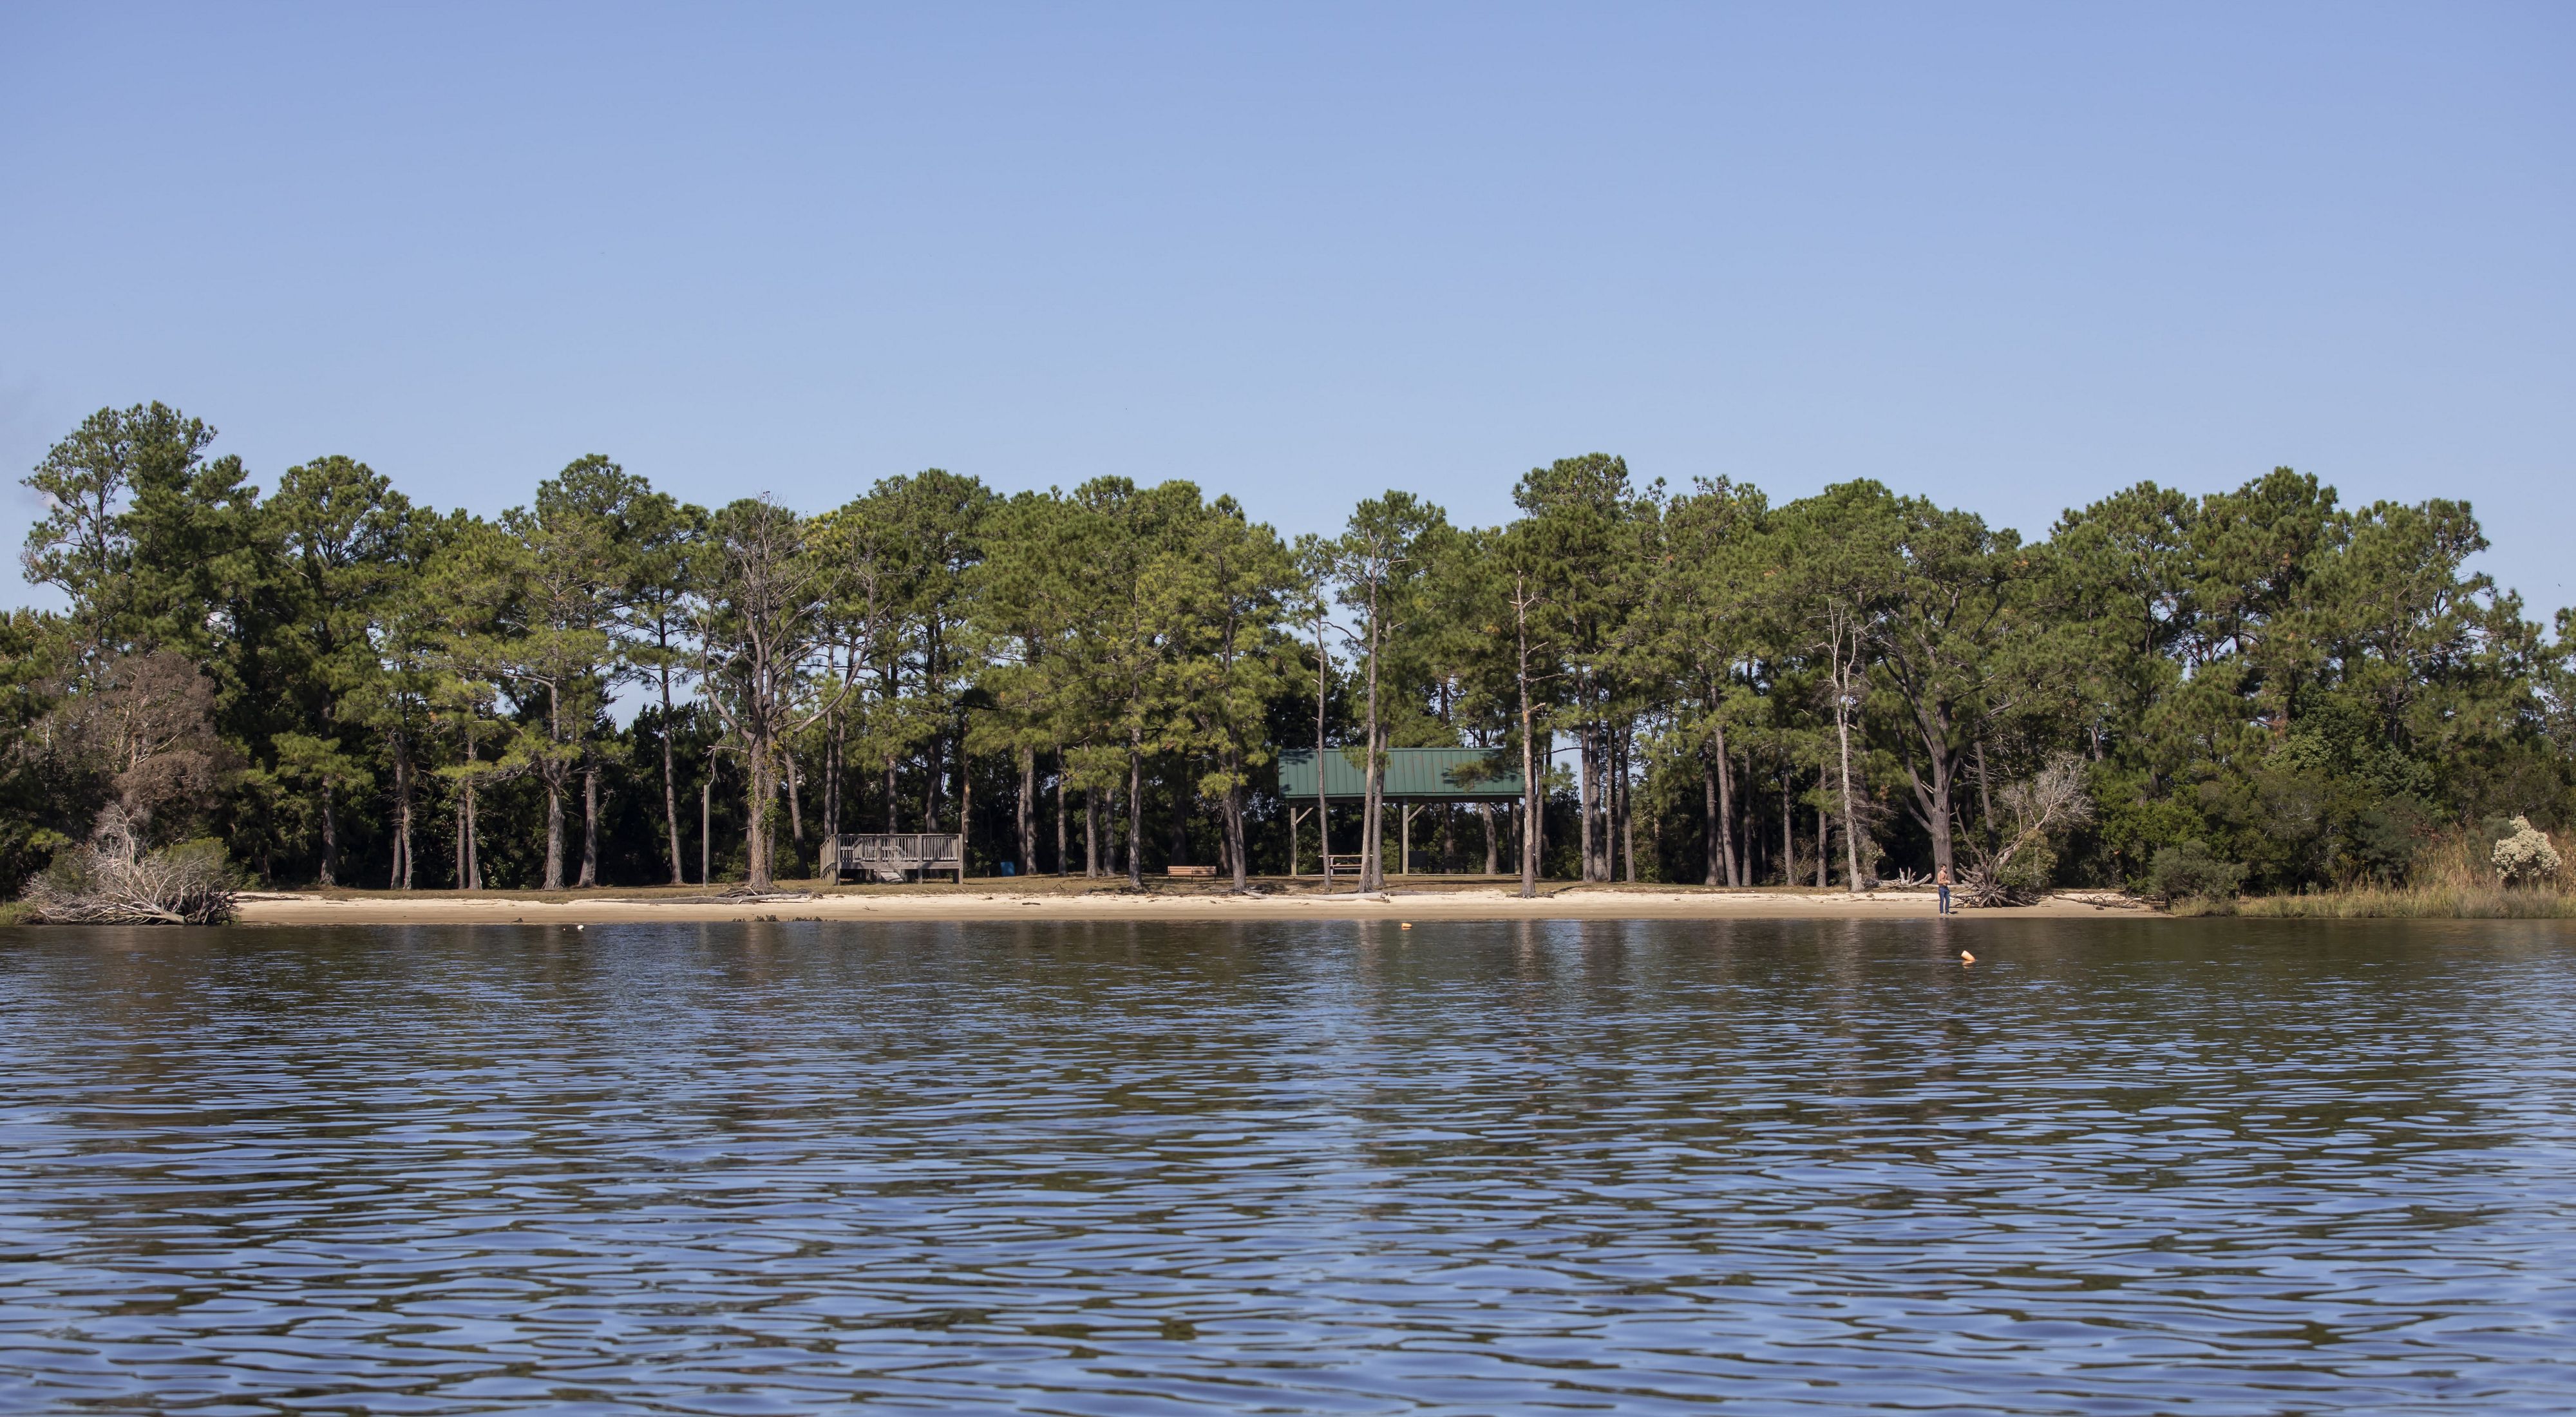 Calm waters surround a forested island.